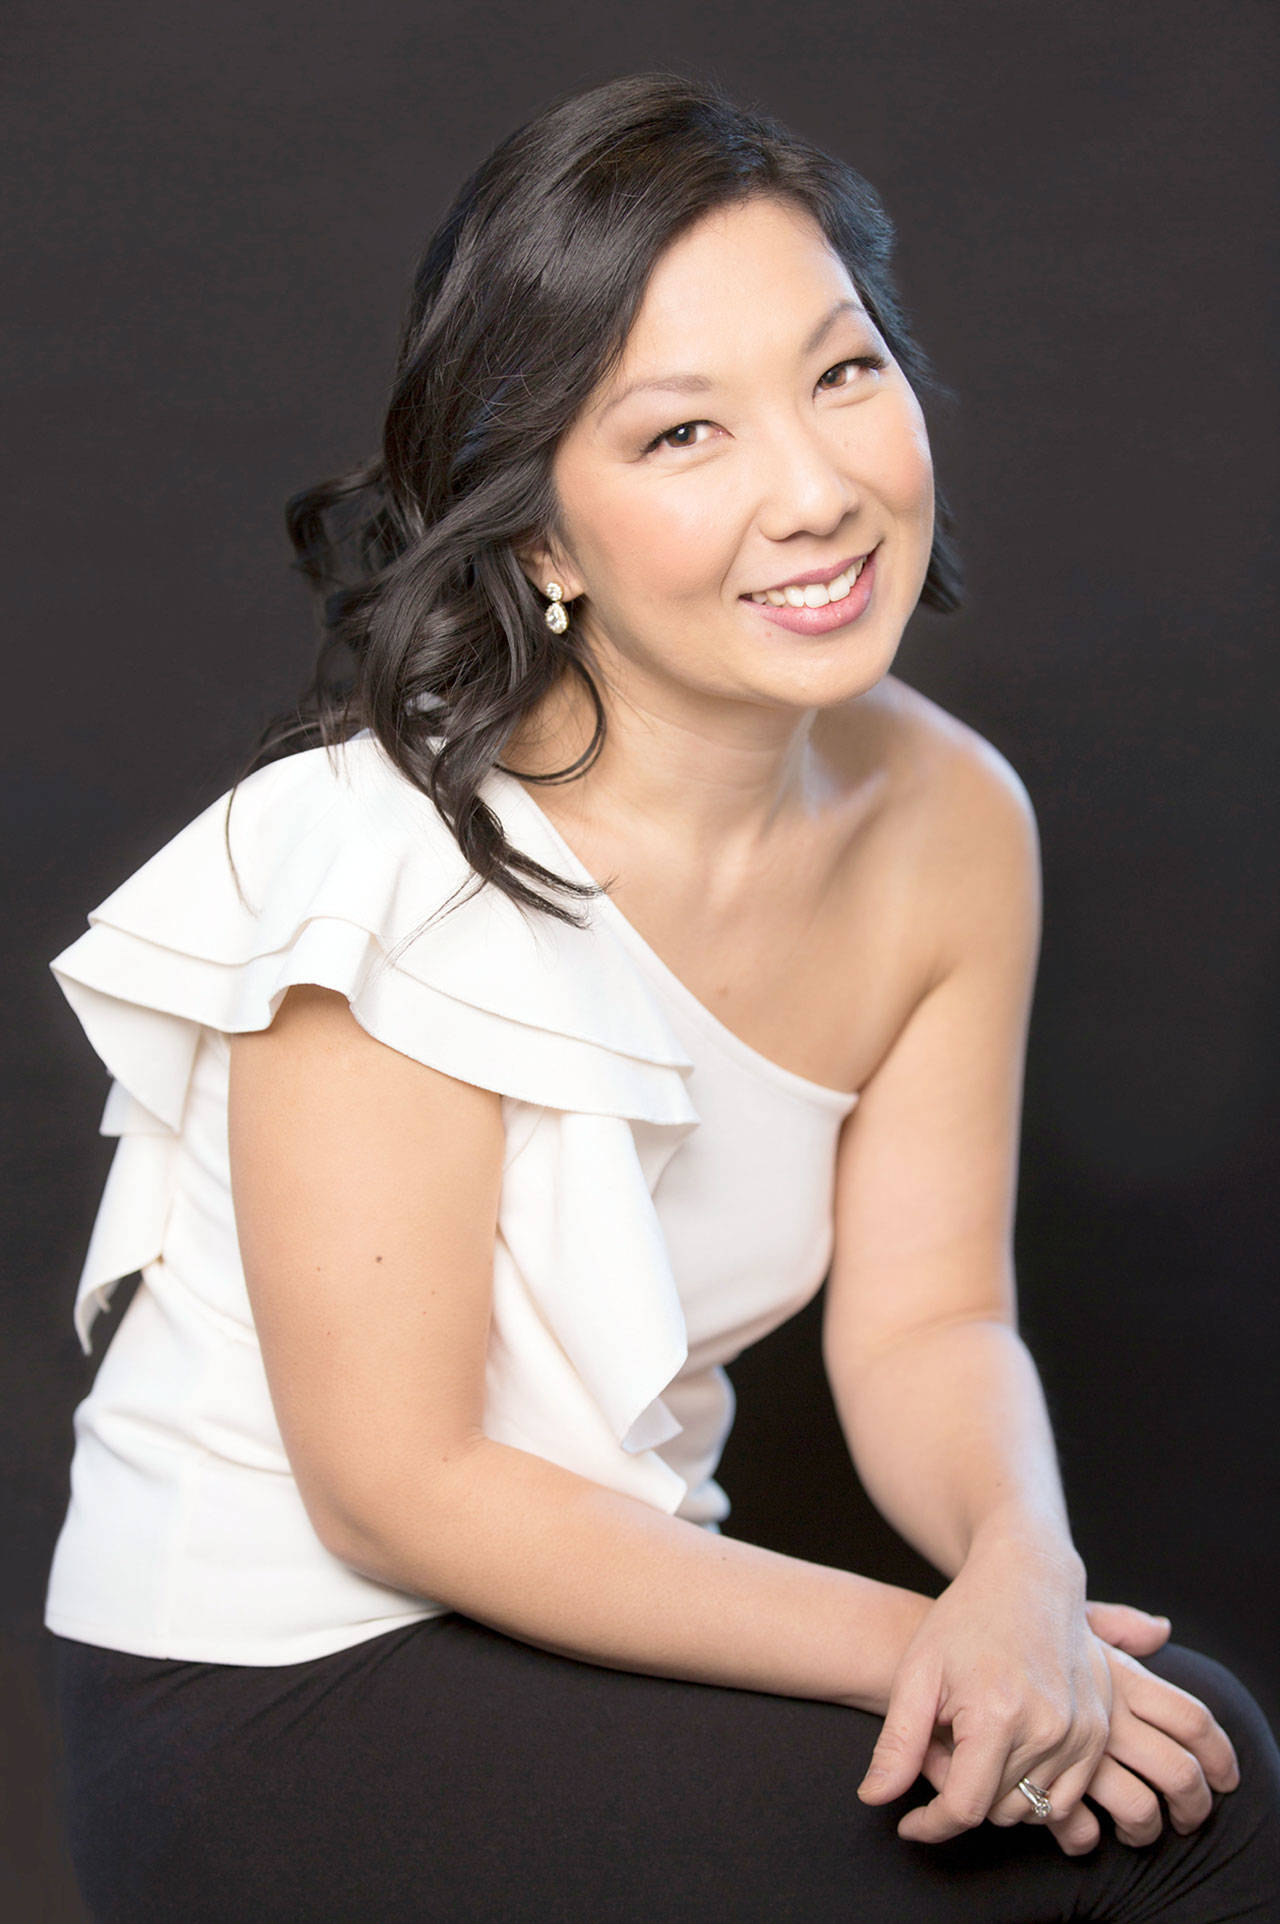 Pianist Jessica Choe of Chicago will make her first trip to play at Trillium Woods Farm in Quilcene this weekend. (Photo courtesy Concerts in the Barn)